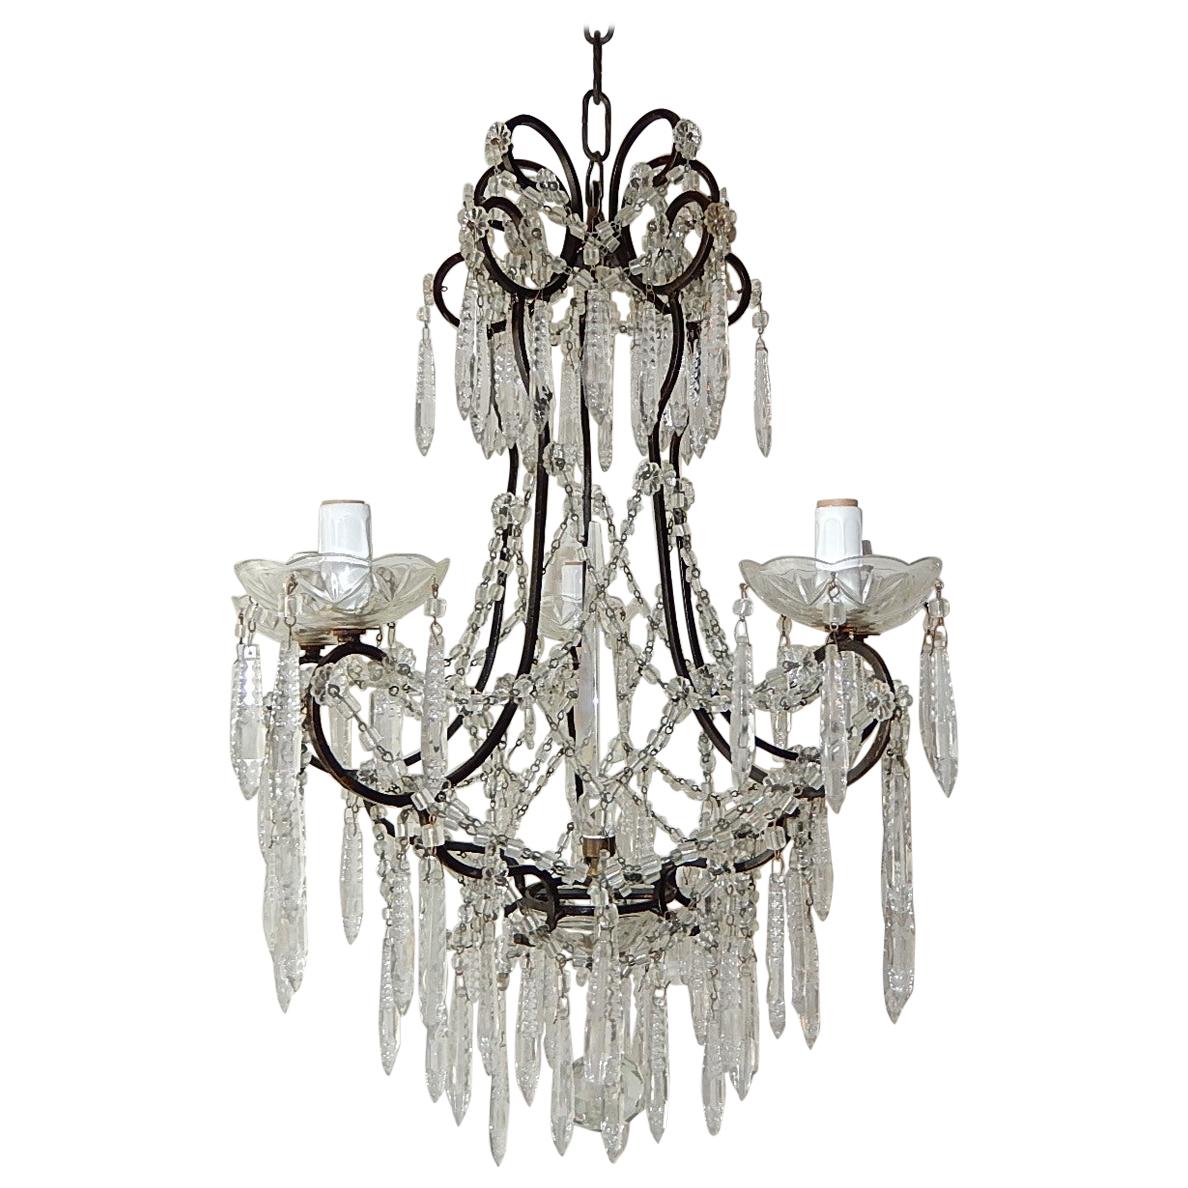 French Rare Cut Crystal with Center Spear Chandelier